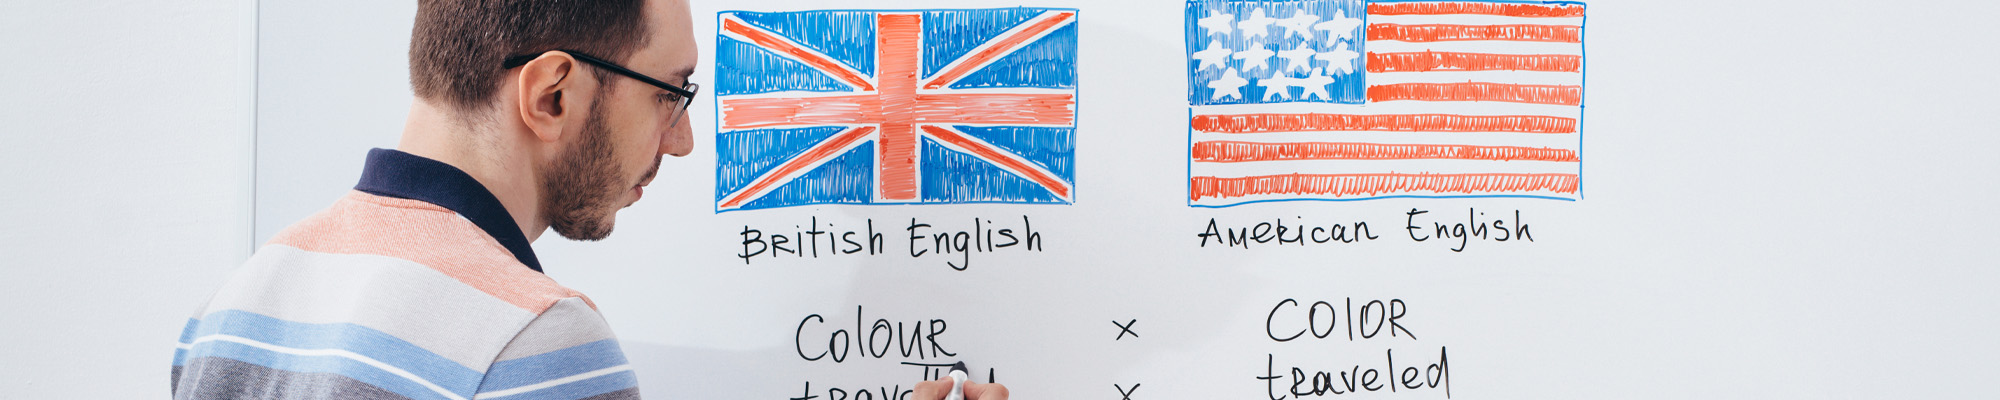 man writing on white board, words in American English and British English